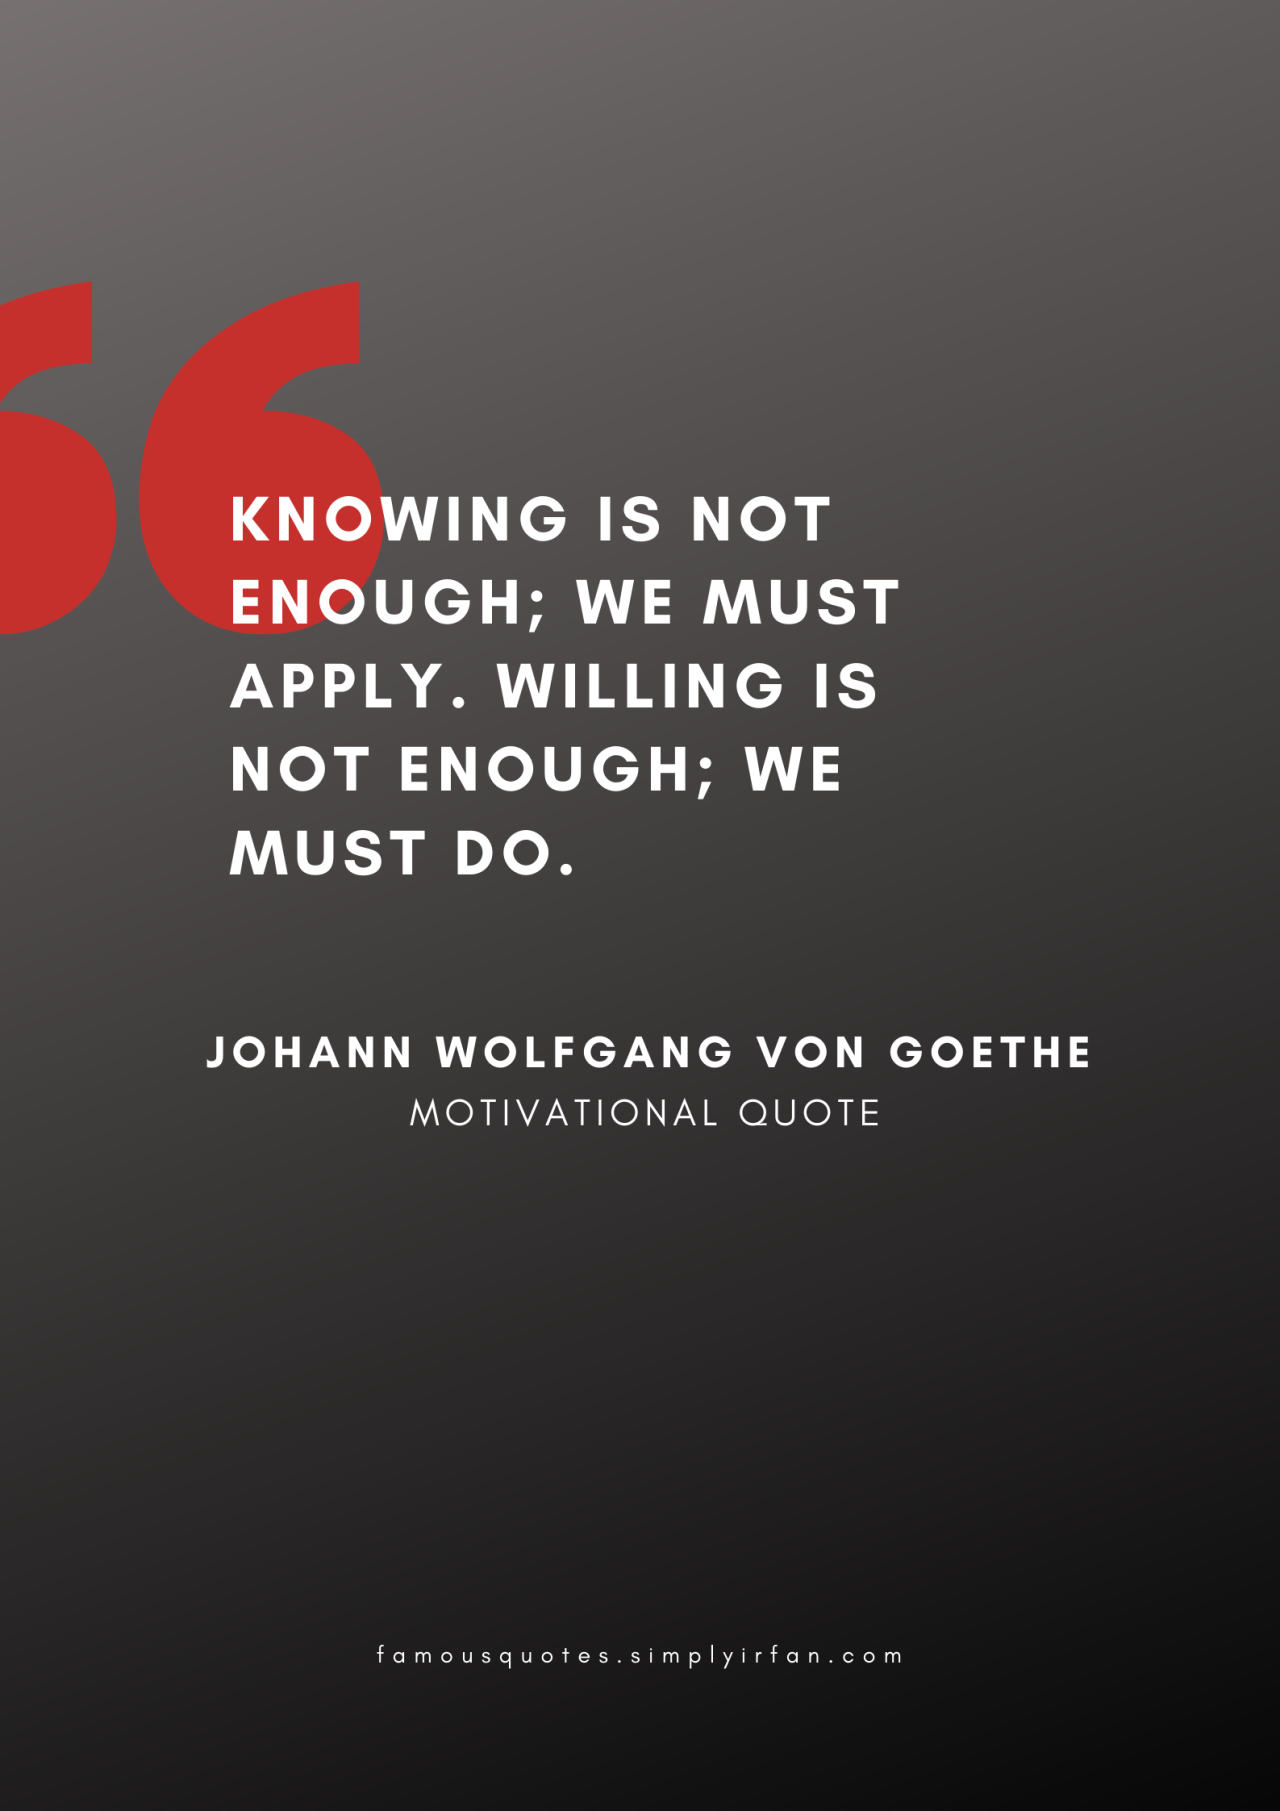 Knowing is not enough; we must apply. Willing is not enough; we must do. Quote by Johann Wolfgang von Goethe